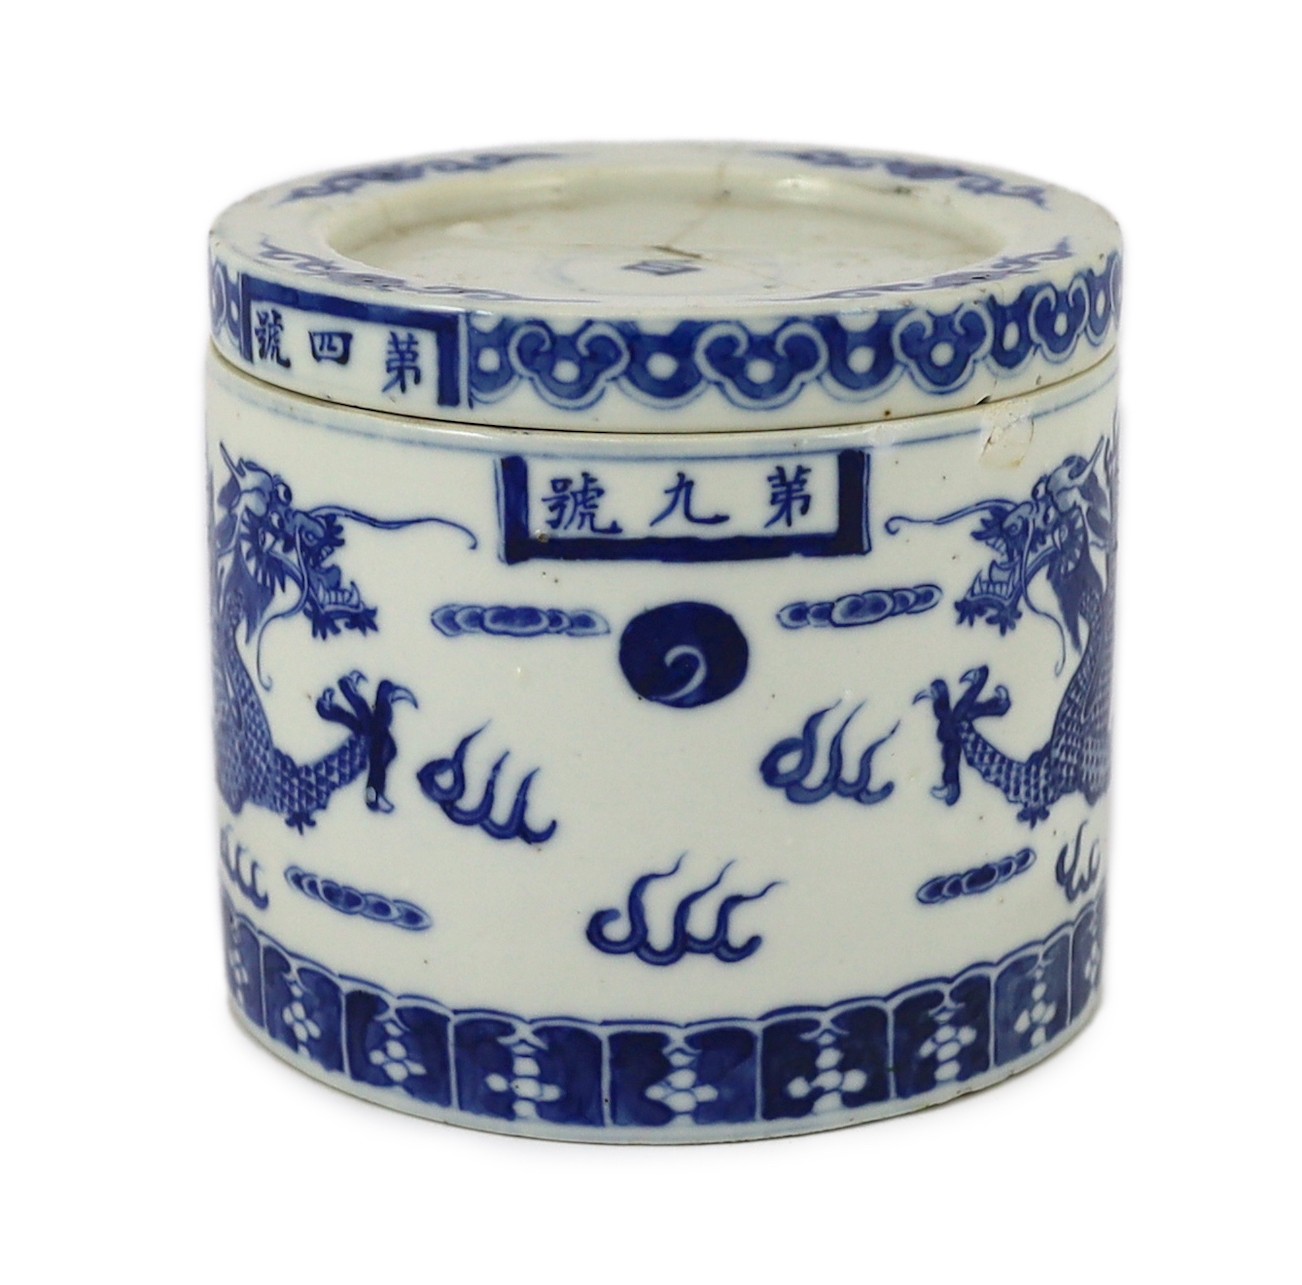 An unusual Chinese blue and white 'dragon' box and cover, 19th century, 10.5cm high, lid repaired, rim chip